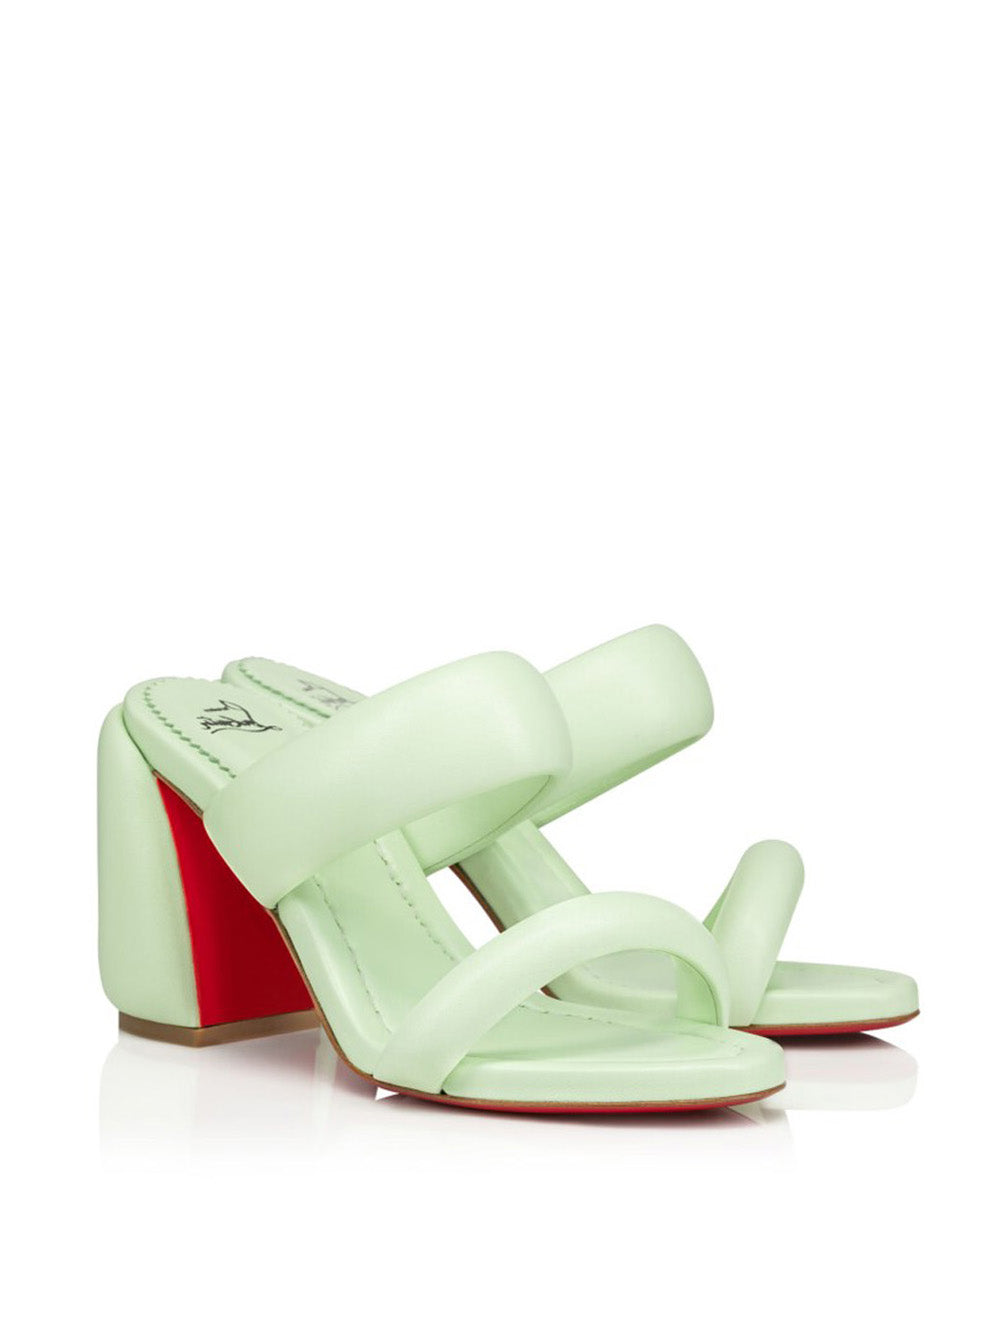 Inflama 85 sandals in nappa leather Christian Louboutin